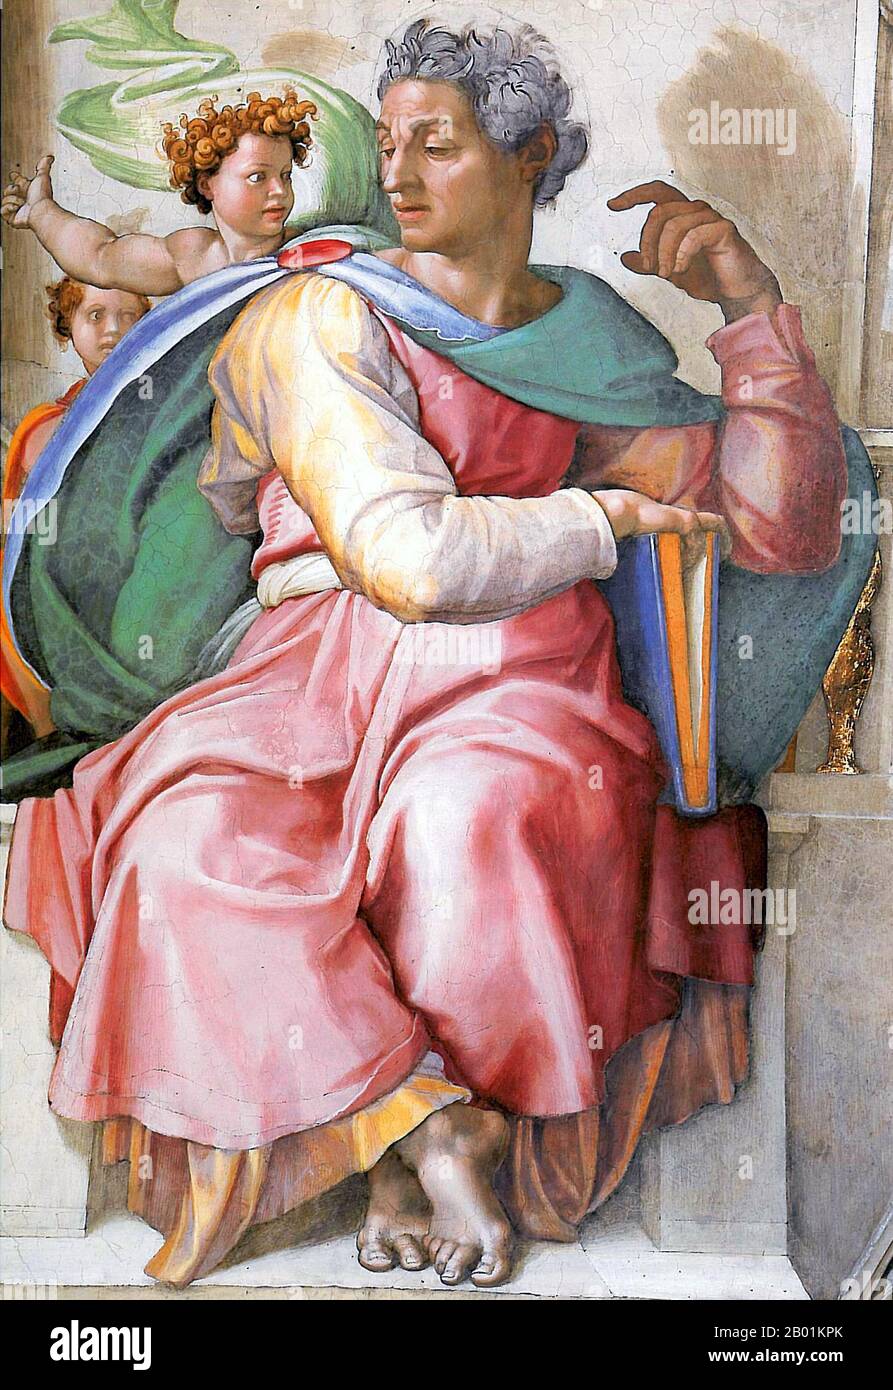 Italy: 'The Prophet Isaiah'. Fresco by Michelangelo (6 March 1475 - 18 February 1564) and his assistants, Sistine Chapel ceiling, Vatican City, c. 1508-1512.  Isaiah was a prophet in the 8th-century BCE Kingdom of Judah. Jews and Christians consider the Book of Isaiah a part of their Biblical canon; he is the first listed (although not the earliest) of the neviim akharonim, the later prophets. Many of the New Testament teachings of Jesus refer to the book of Isaiah. Stock Photo